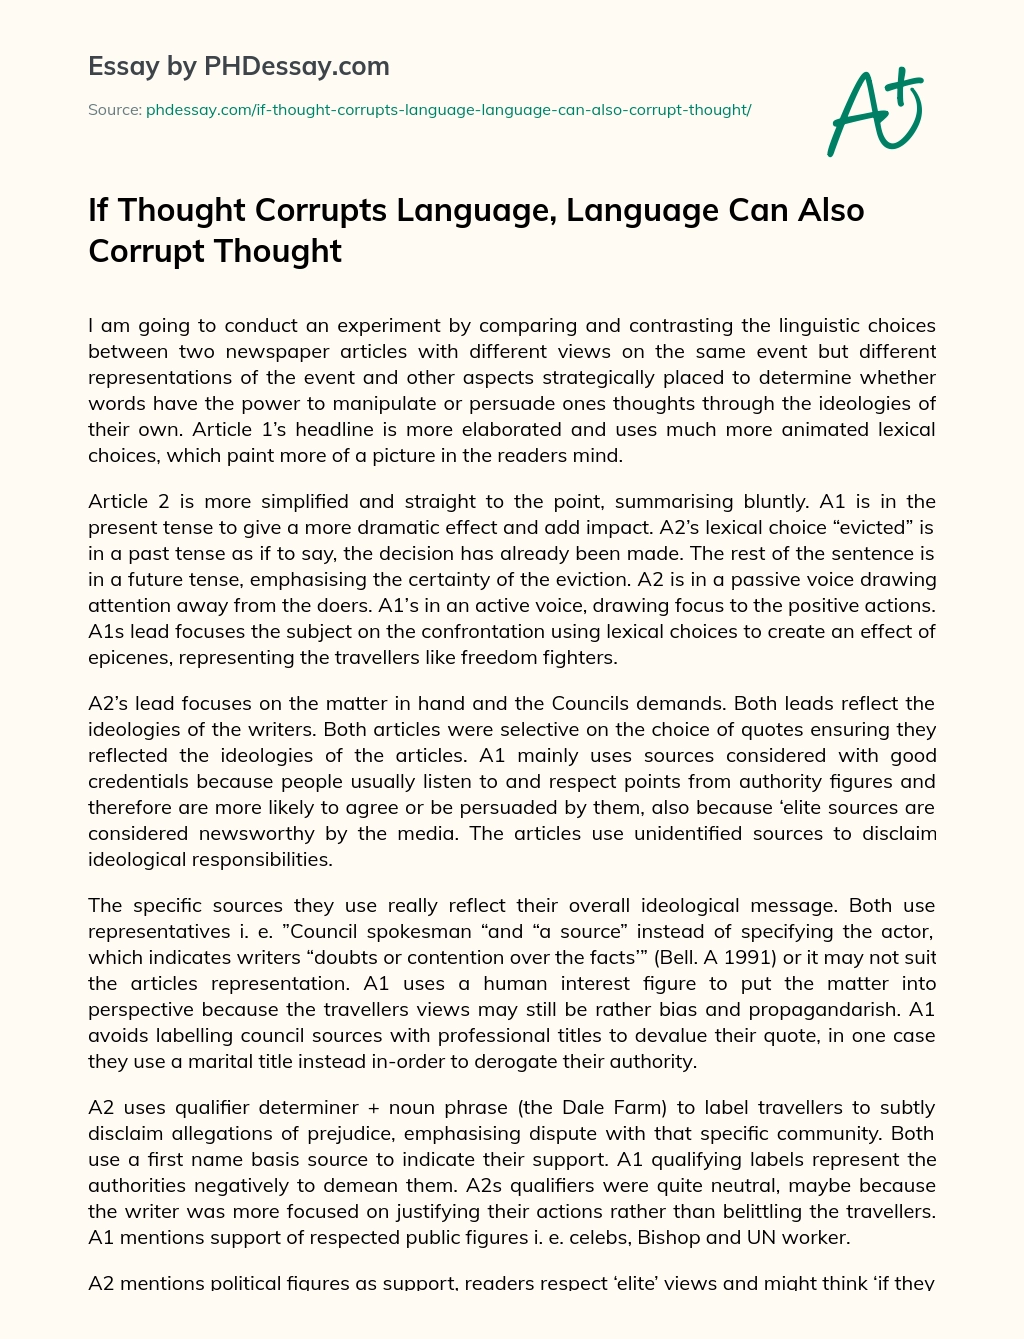 If Thought Corrupts Language, Language Can Also Corrupt Thought essay